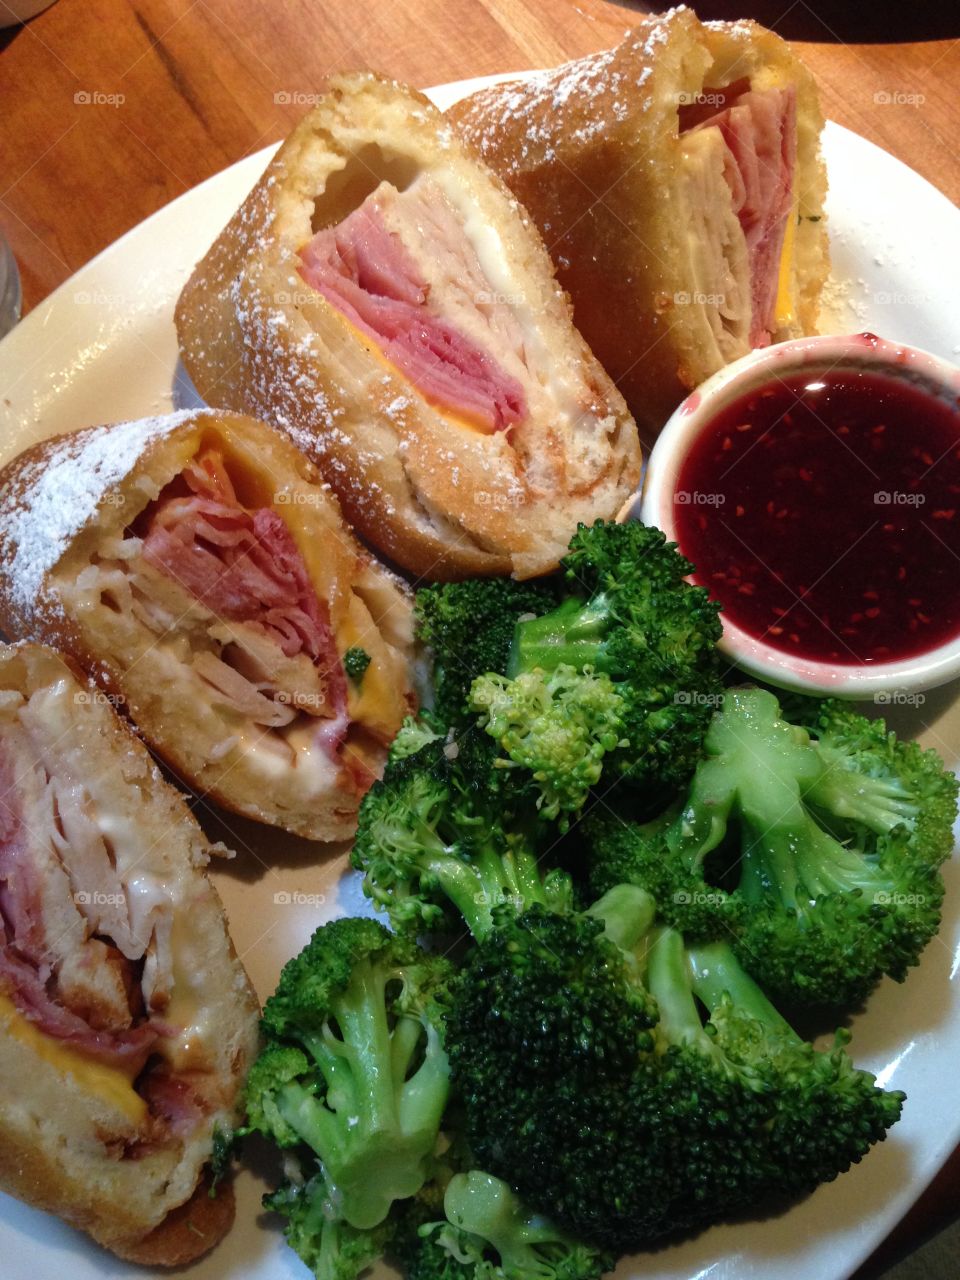 My Favorite . Monte Cristo with raspberry dipping sauce and steamed broccoli. 